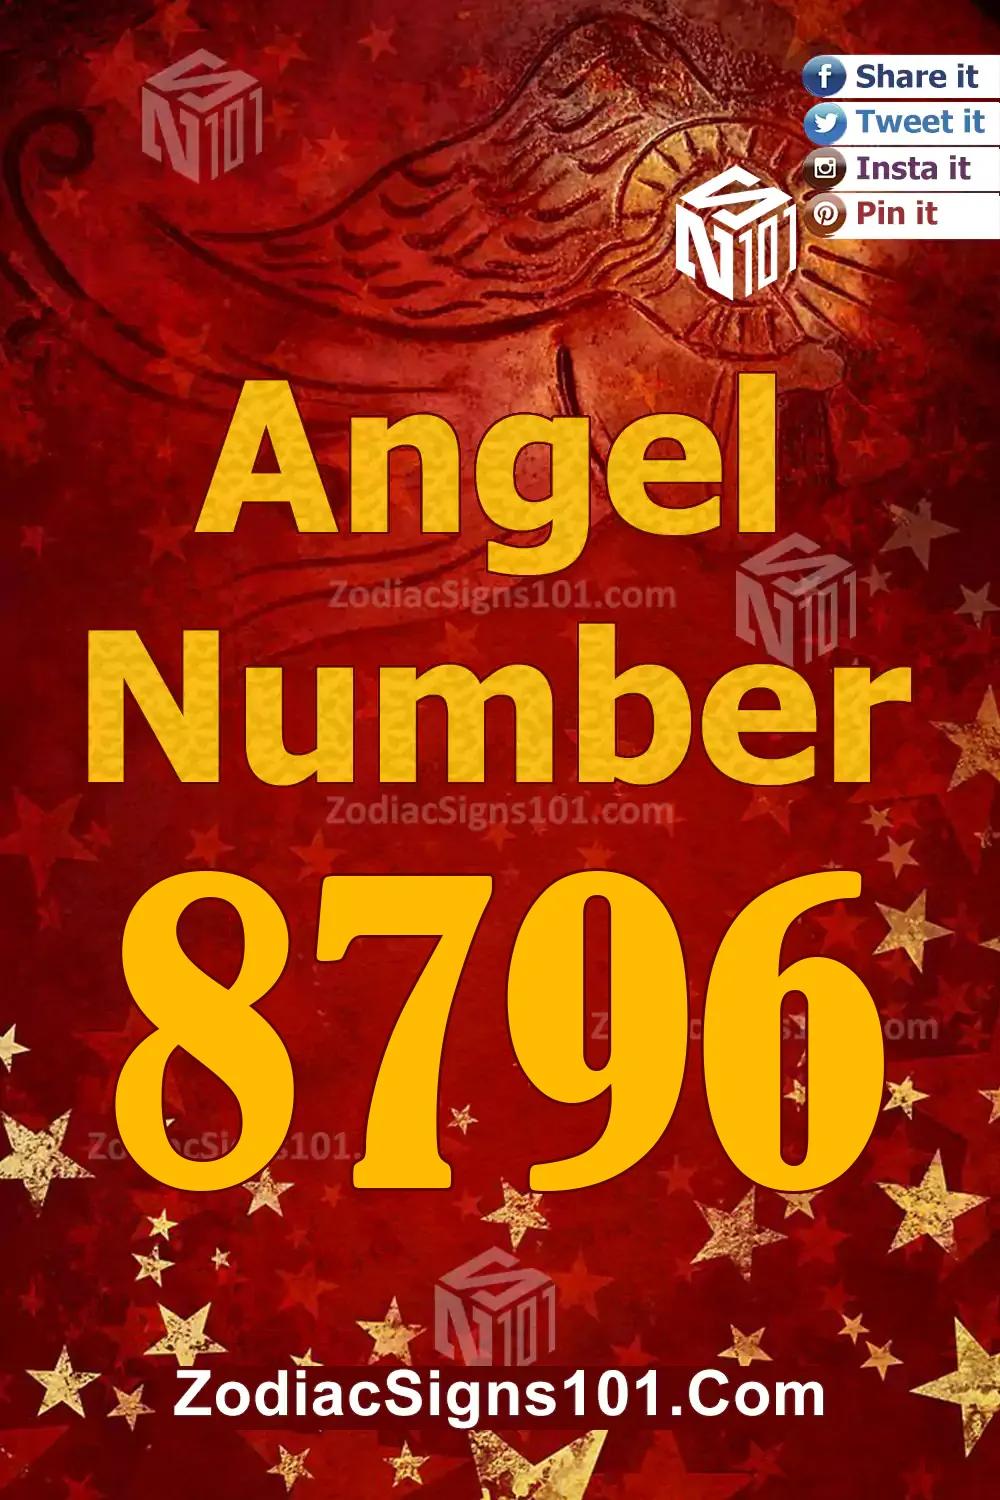 8796 Angel Number Meaning